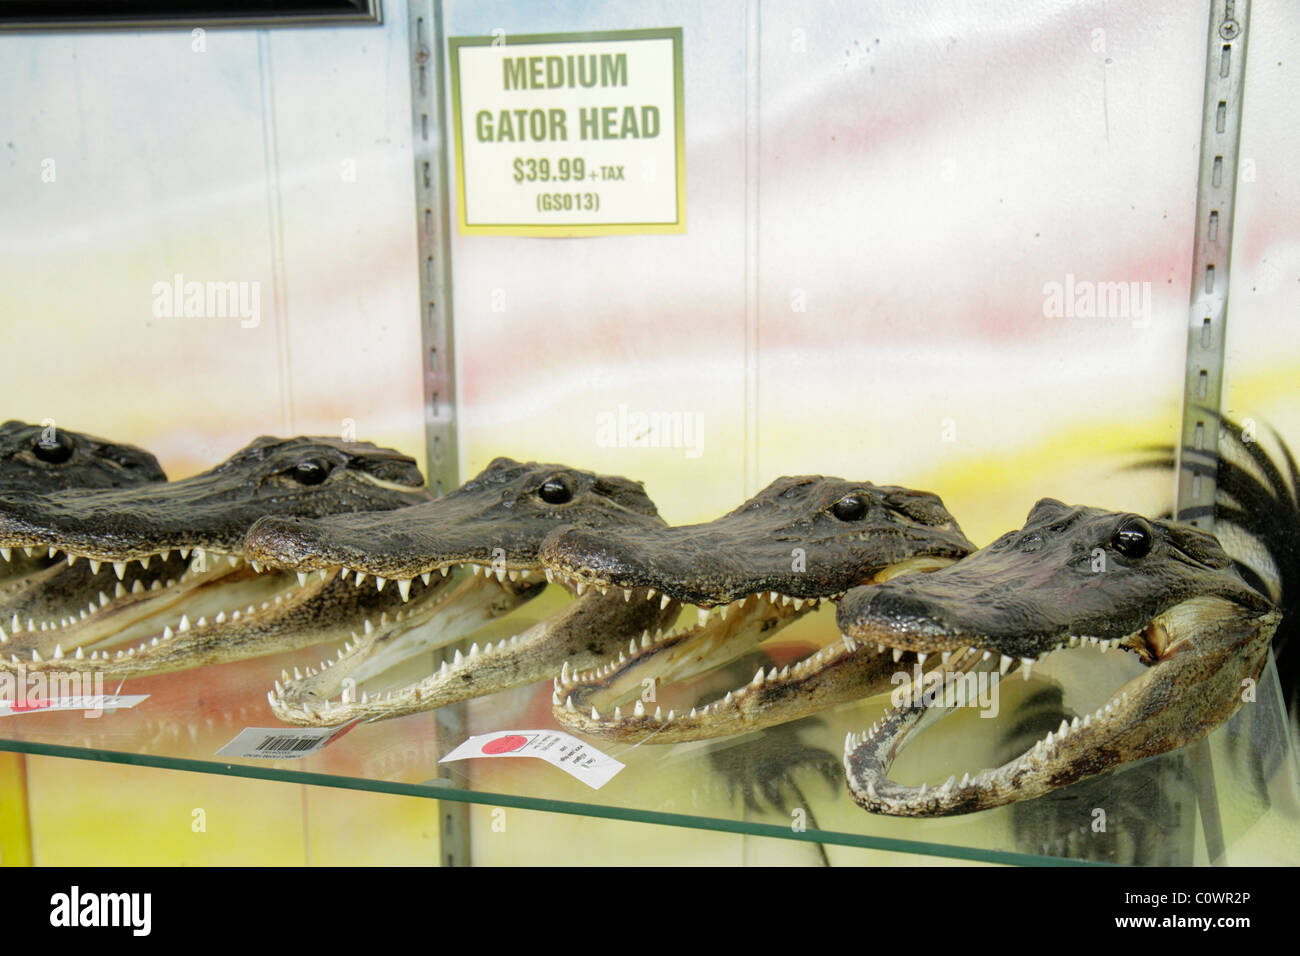 Orlando Florida,Christmas,Jungle Adventure Nature Park & and Zoo,gift shop,store,stores,businesses,district,medium alligator gator head,retail product Stock Photo